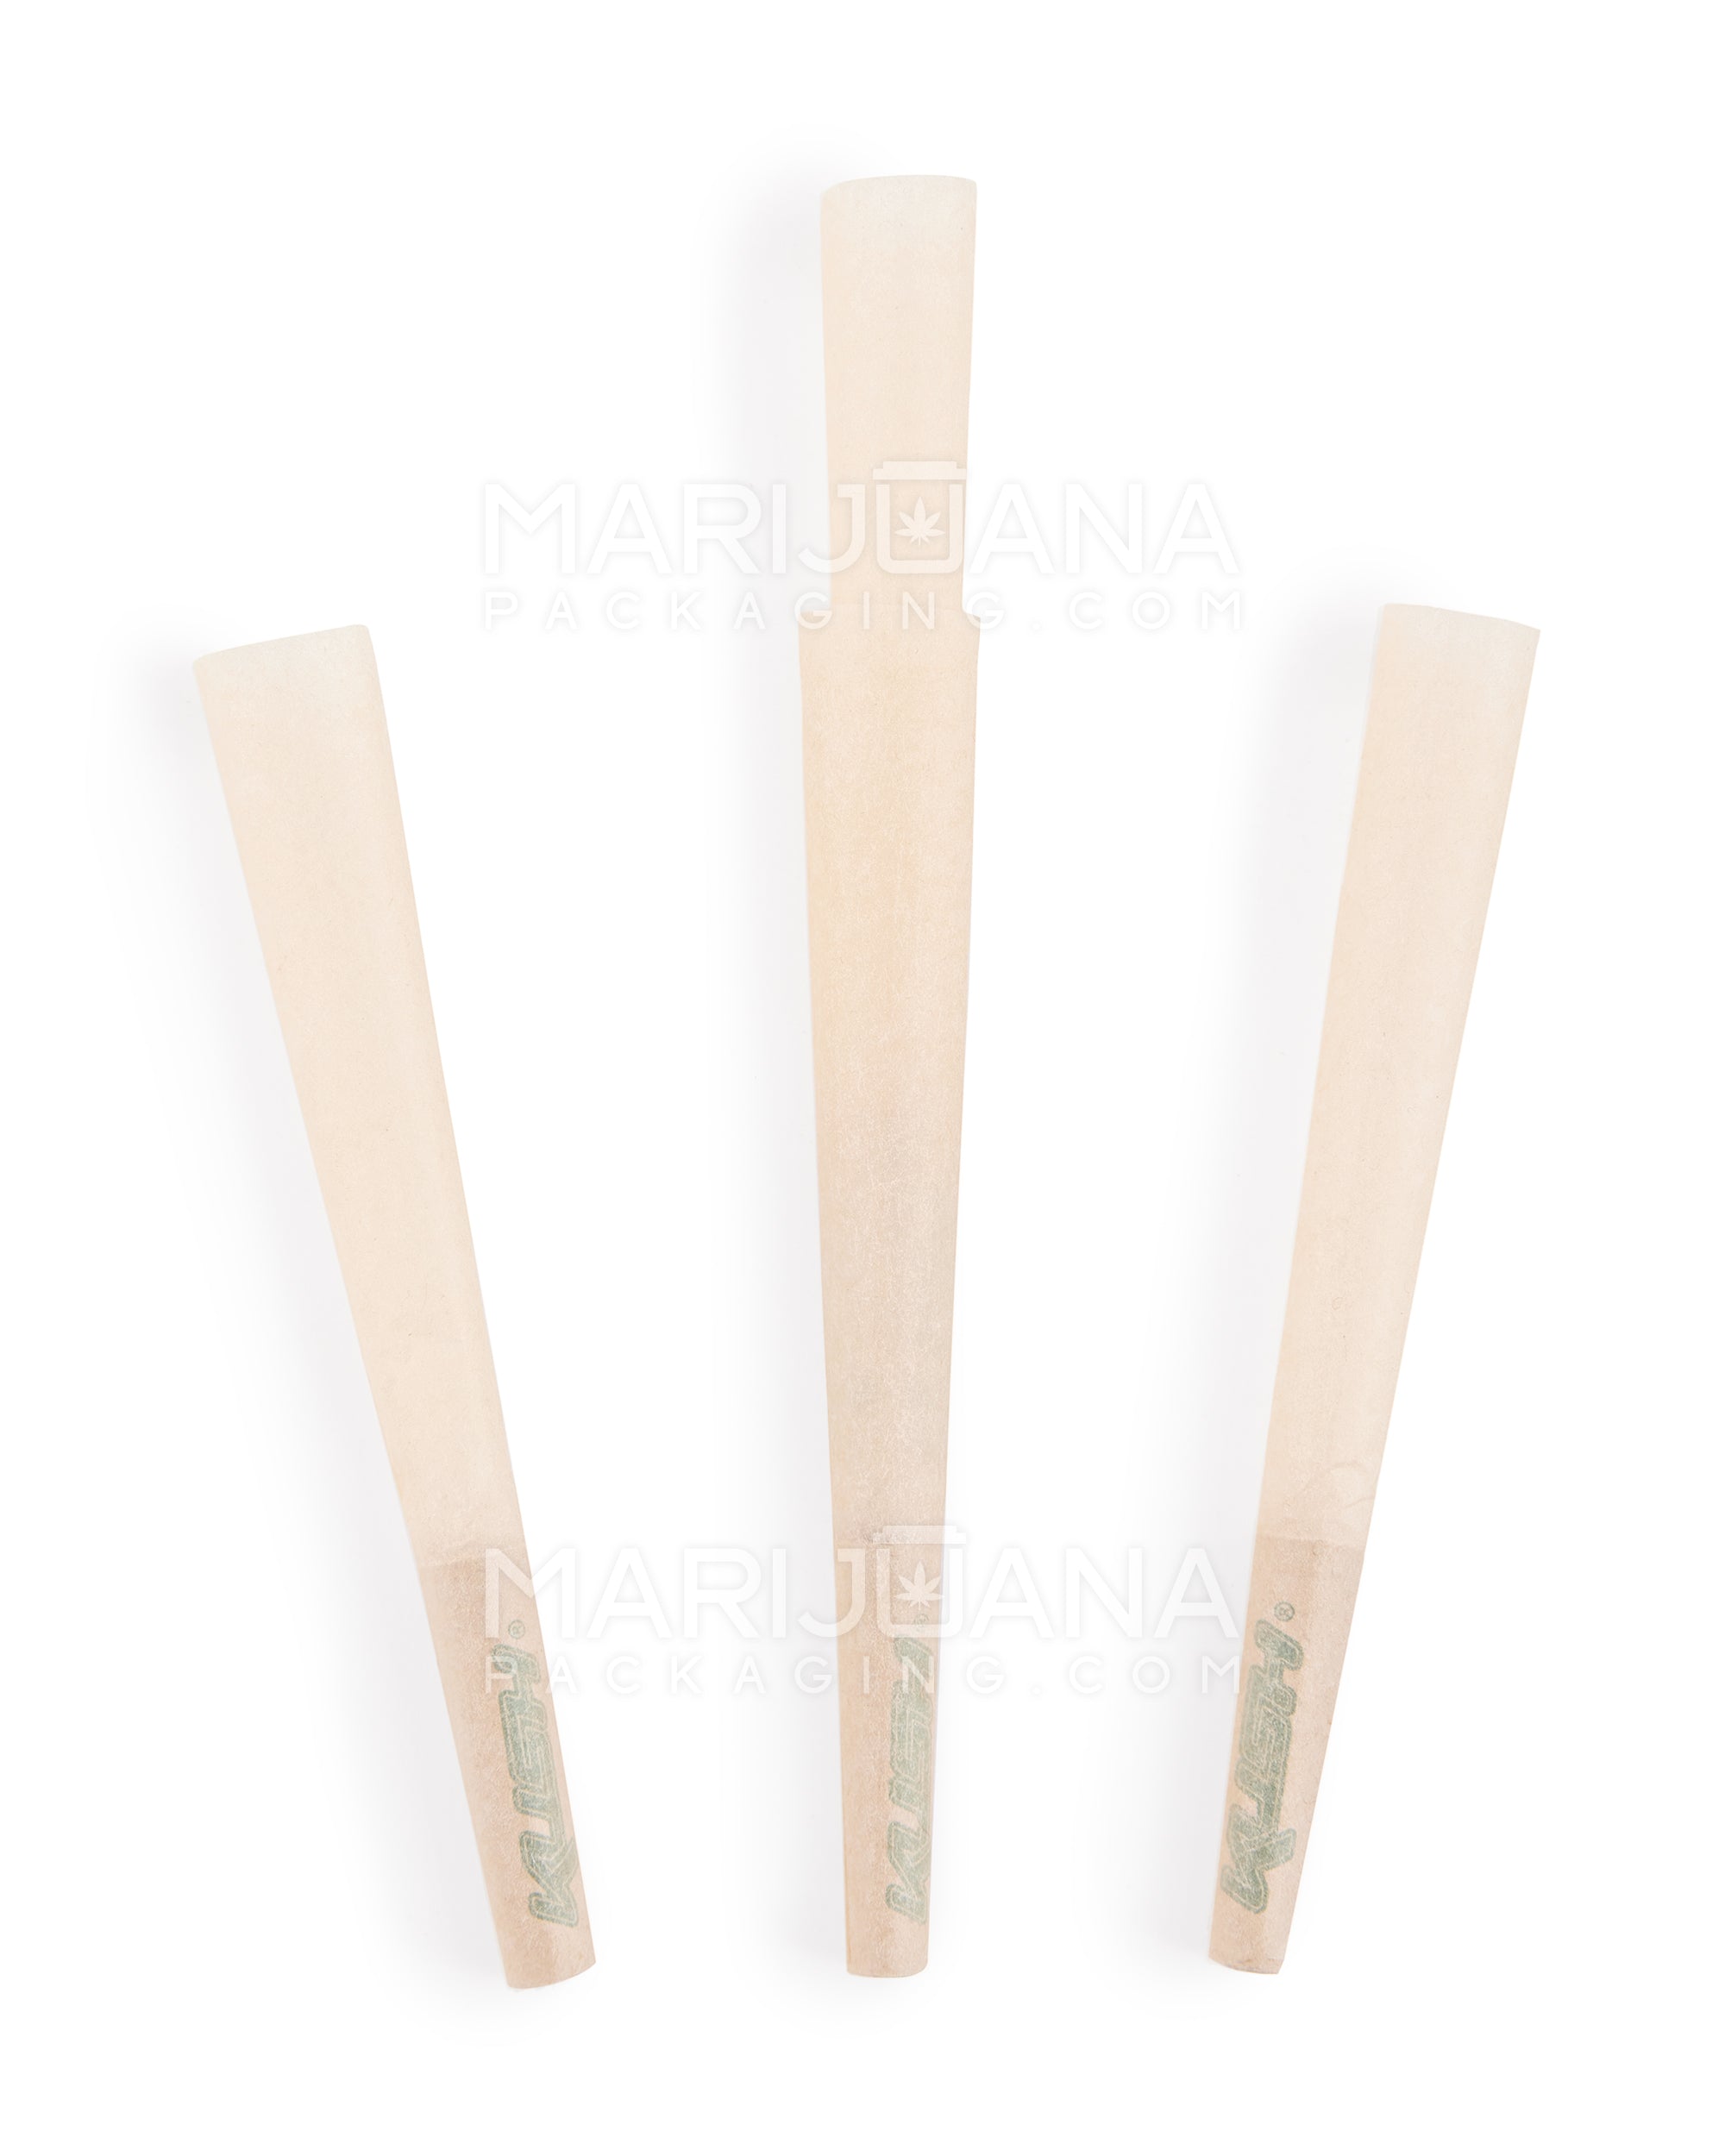 KUSH | Unbleached 1 1/4 Size Pre-Rolled Cones w/ Filter Tip | 84mm - Brown Paper - 900 Count - 4